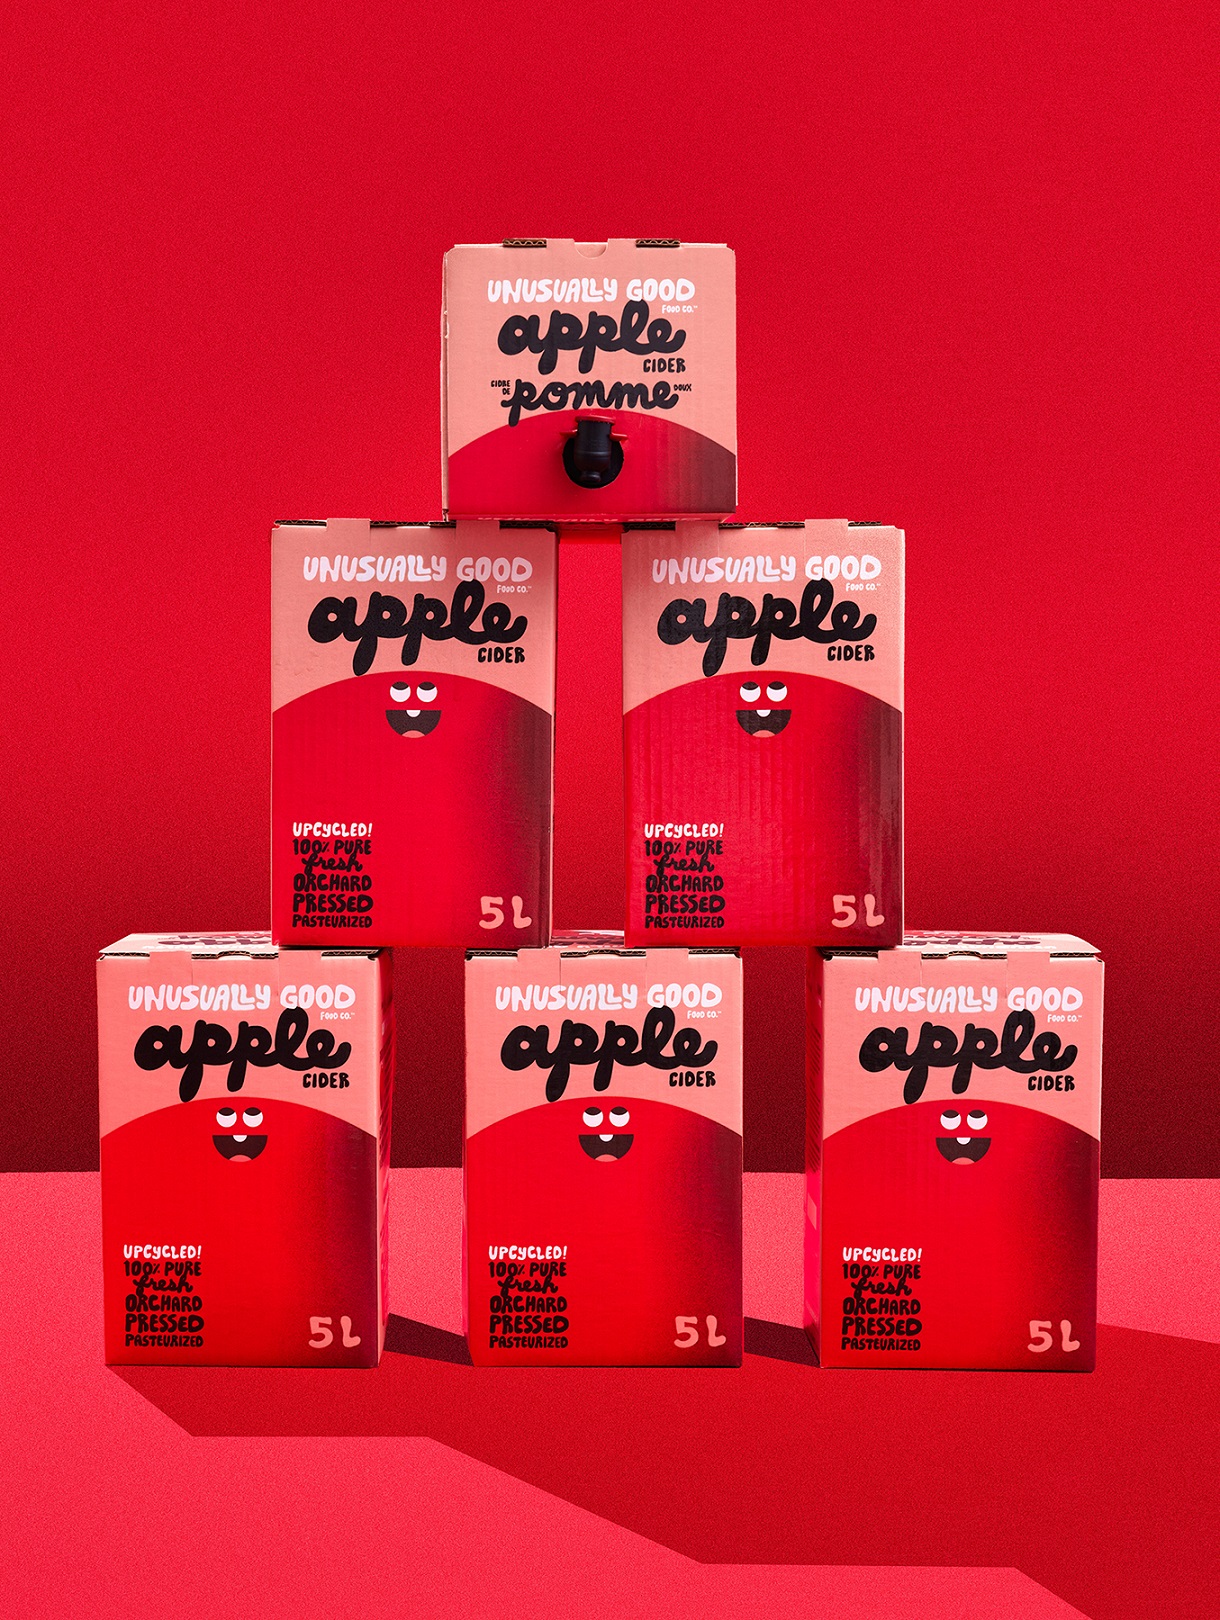 So Good, It’s Unusual. Packaging and Brand Identity for Unusually Good’s Juice Made from Upcycling Imperfect Apples